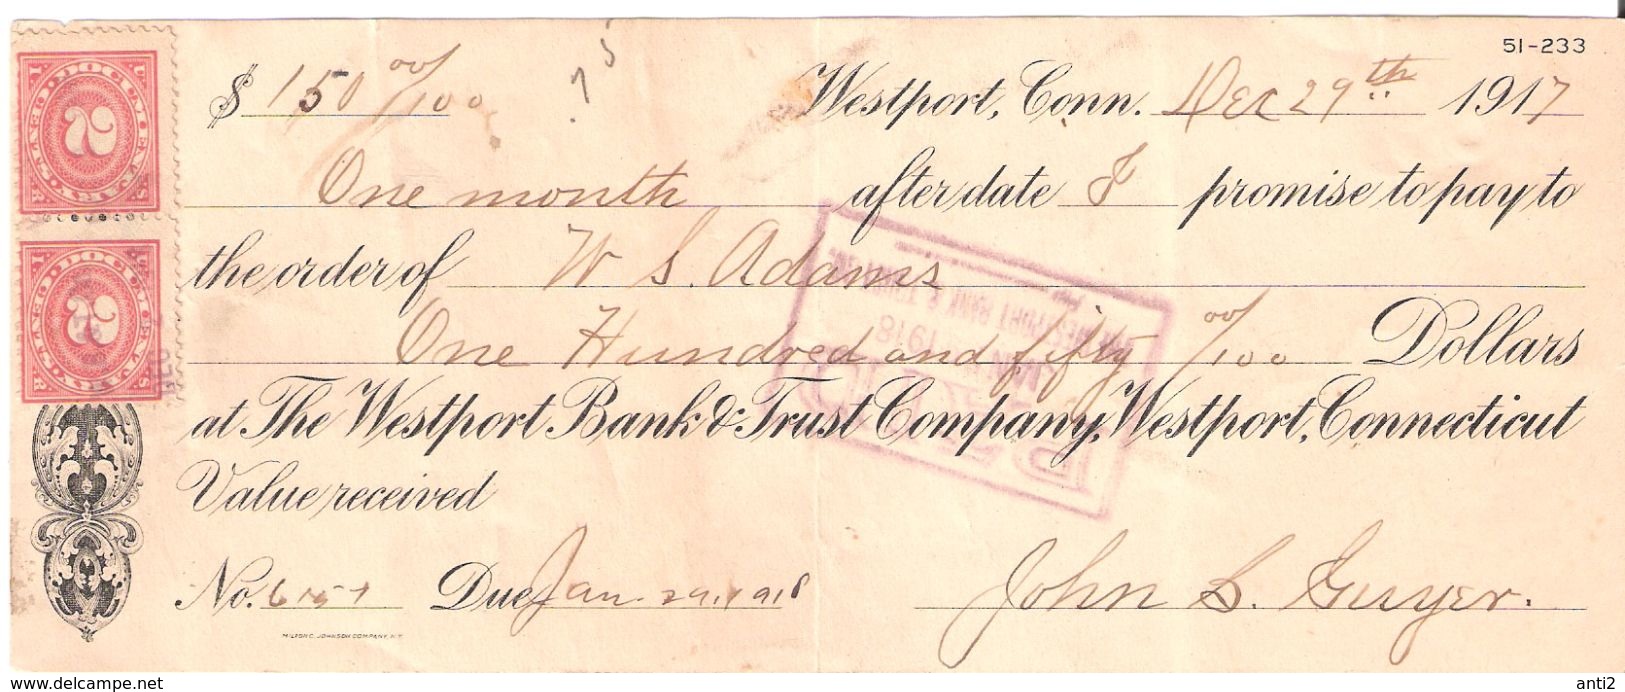 USA Check - The Wesport Bank & Trust Company Westport, Connecticut, No 6157 29.12.1917 - Cheques & Traverler's Cheques